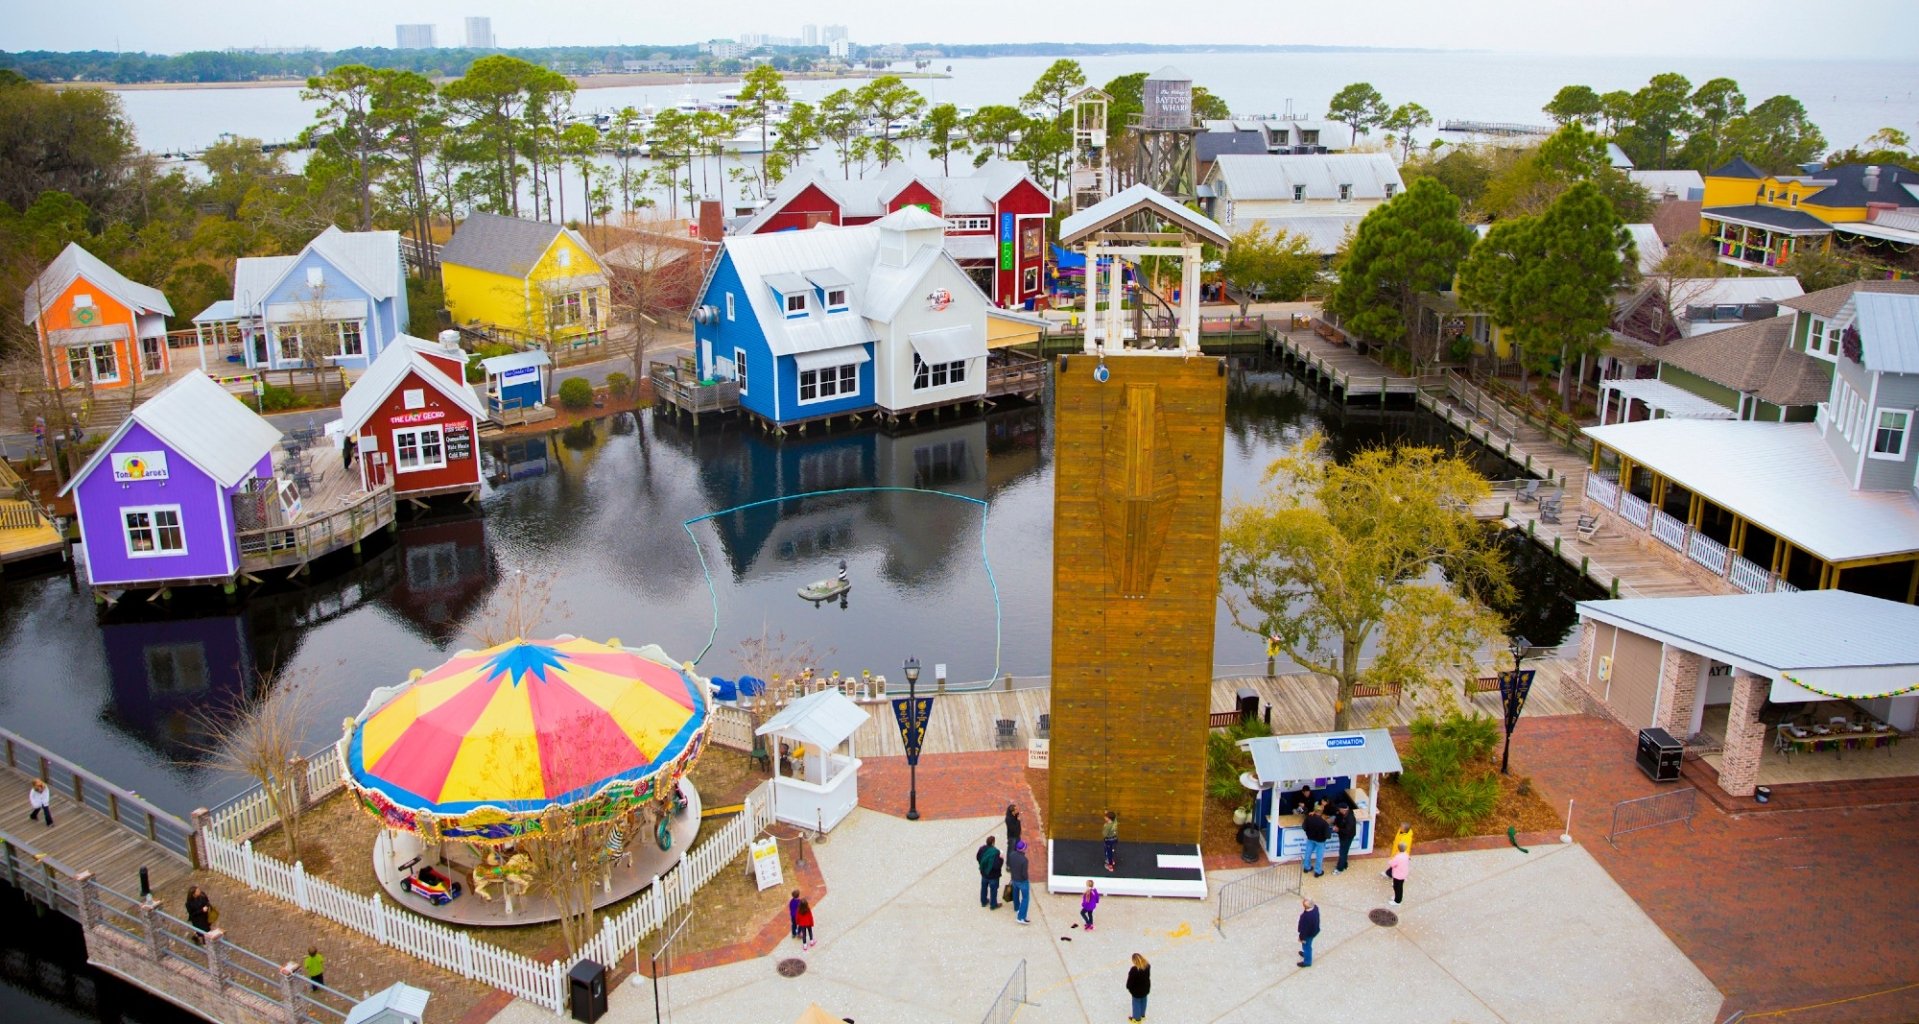 An aerial view of Baytowne Wharf in the daytime.